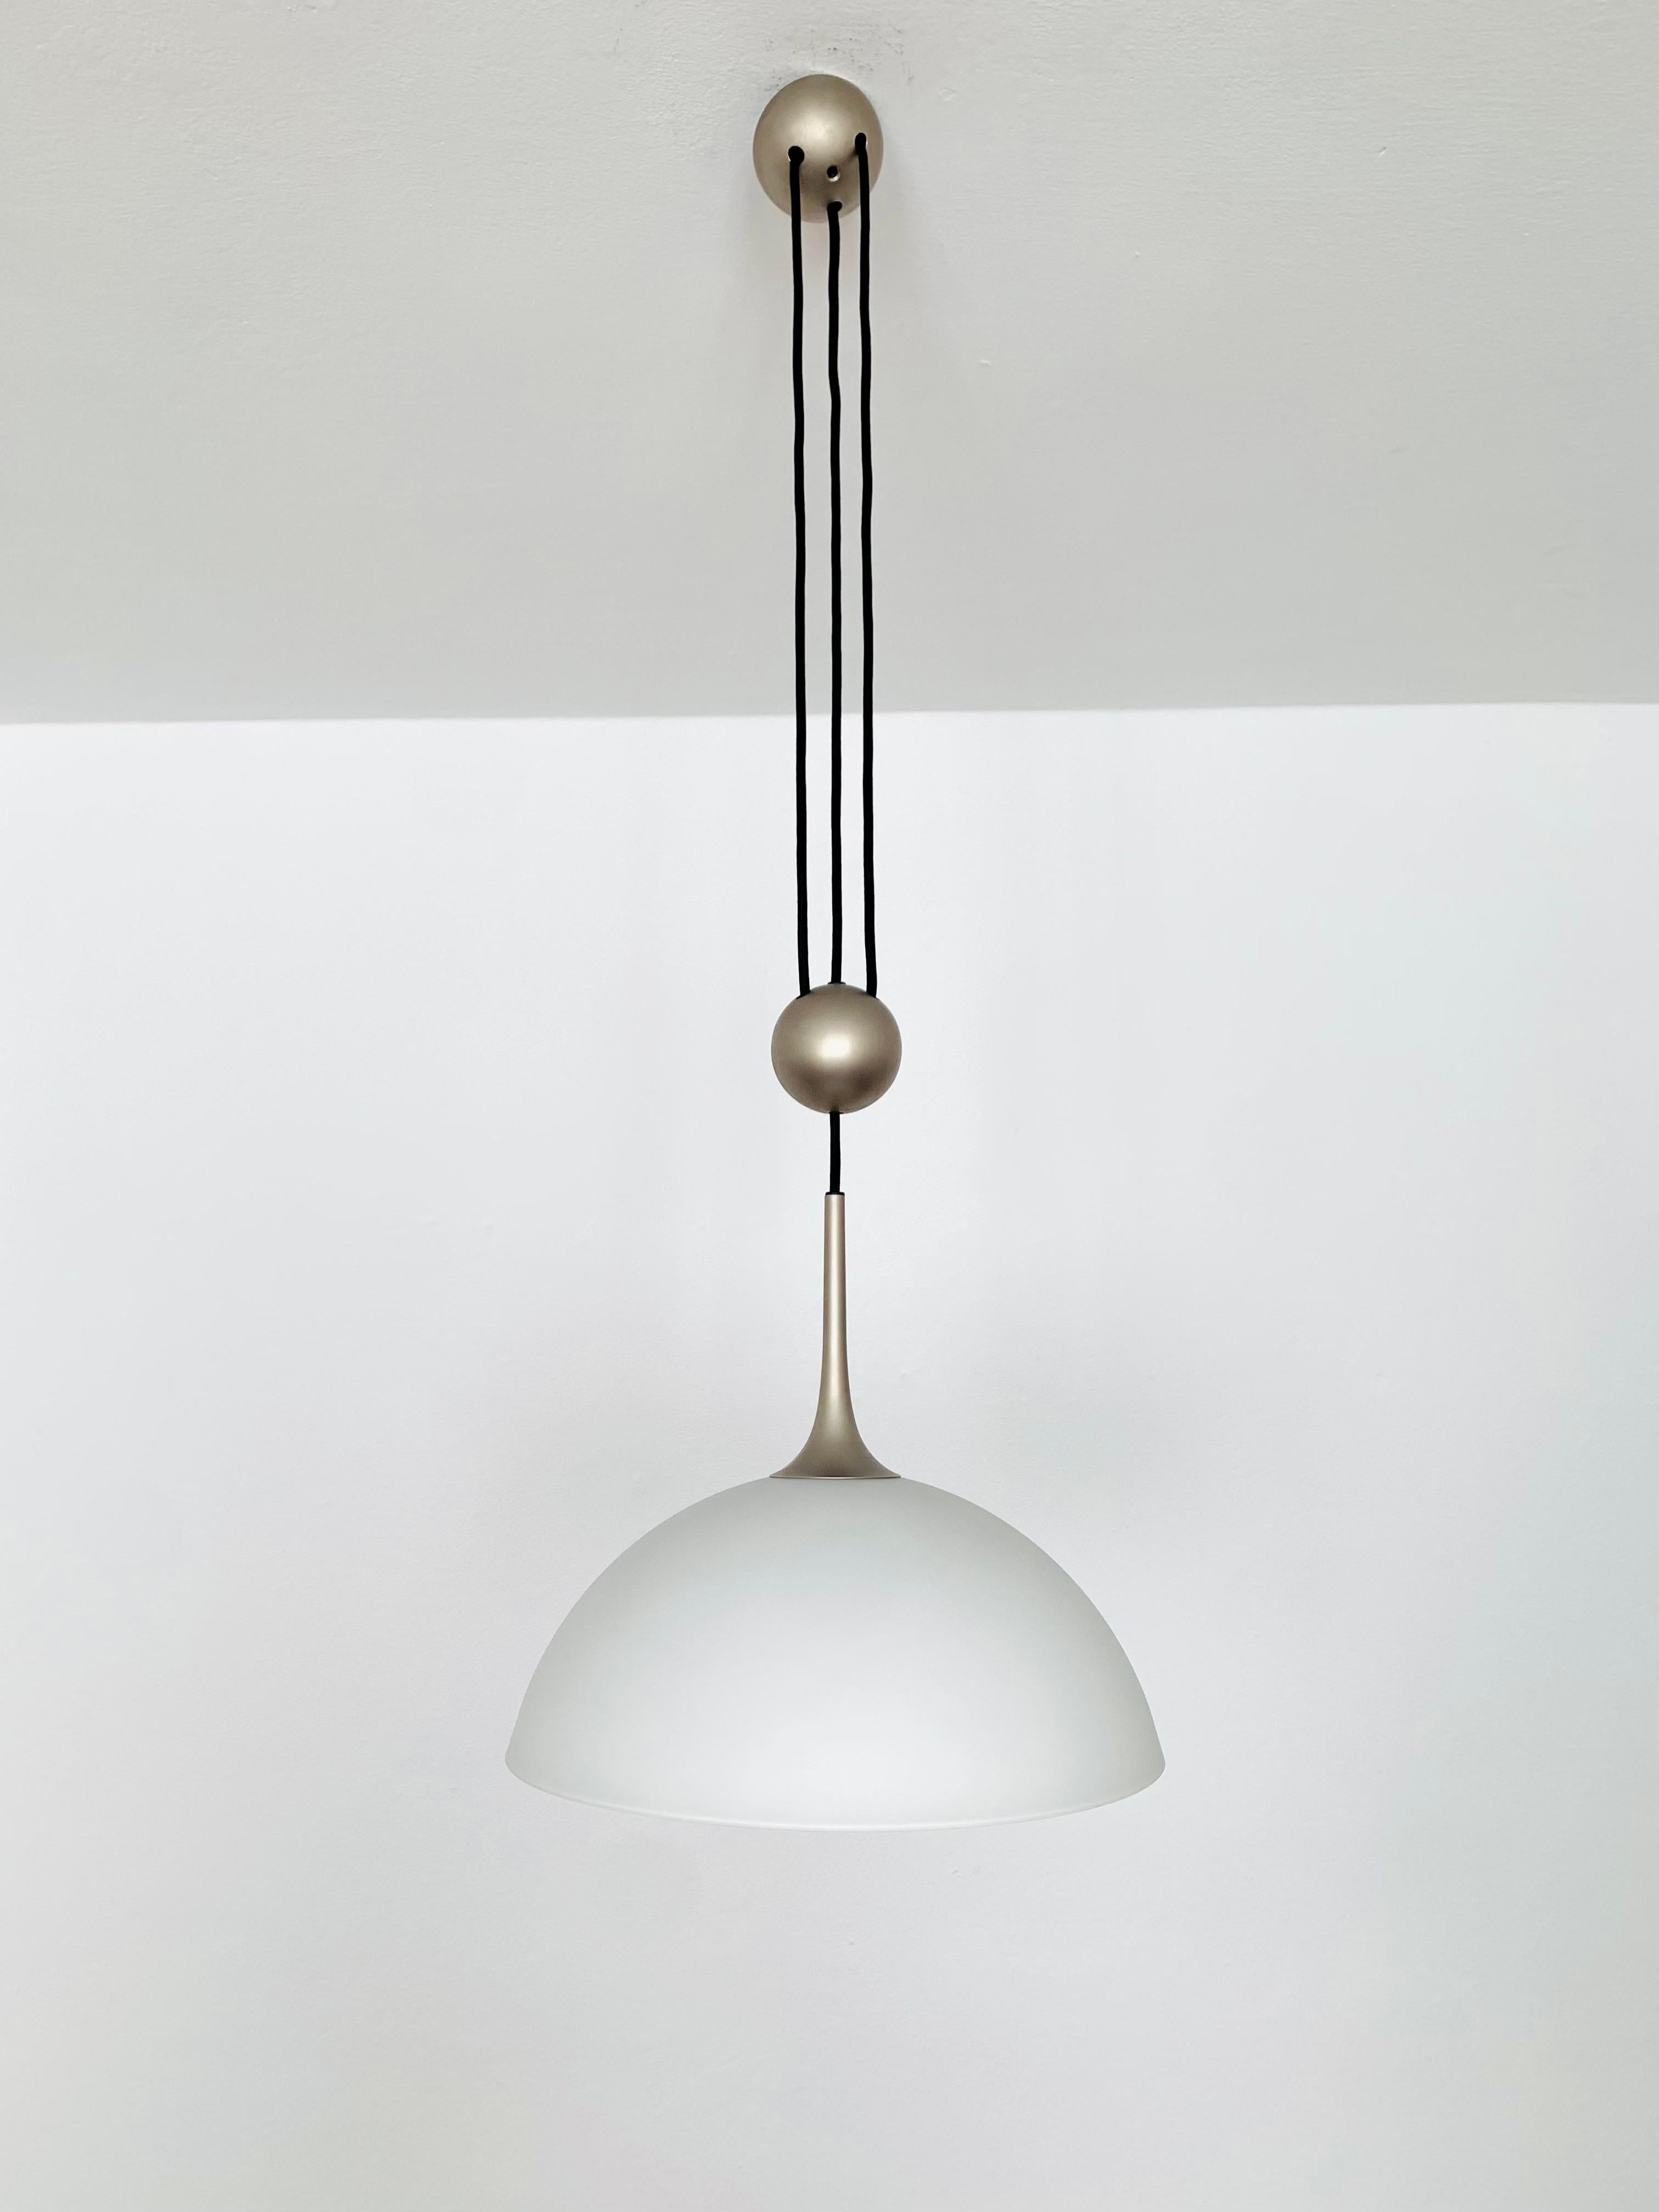 European Opaline Posa 36 Pendant Lamp with Counterweight by Florian Schulz For Sale